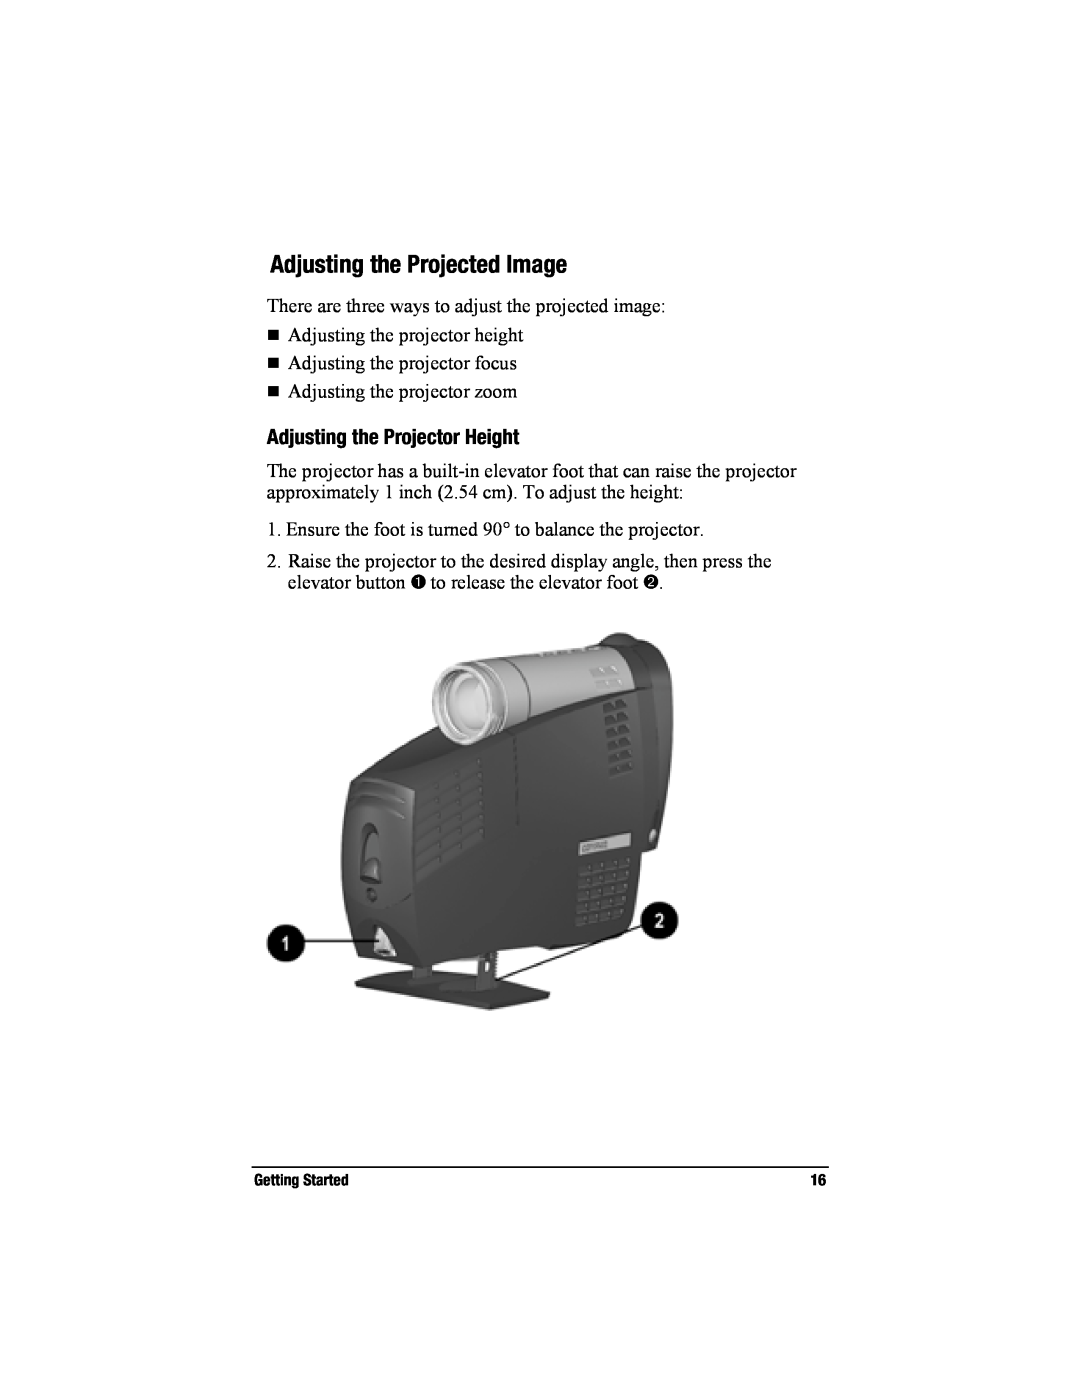 Compaq MP2800 warranty Adjusting the Projected Image, Adjusting the Projector Height 